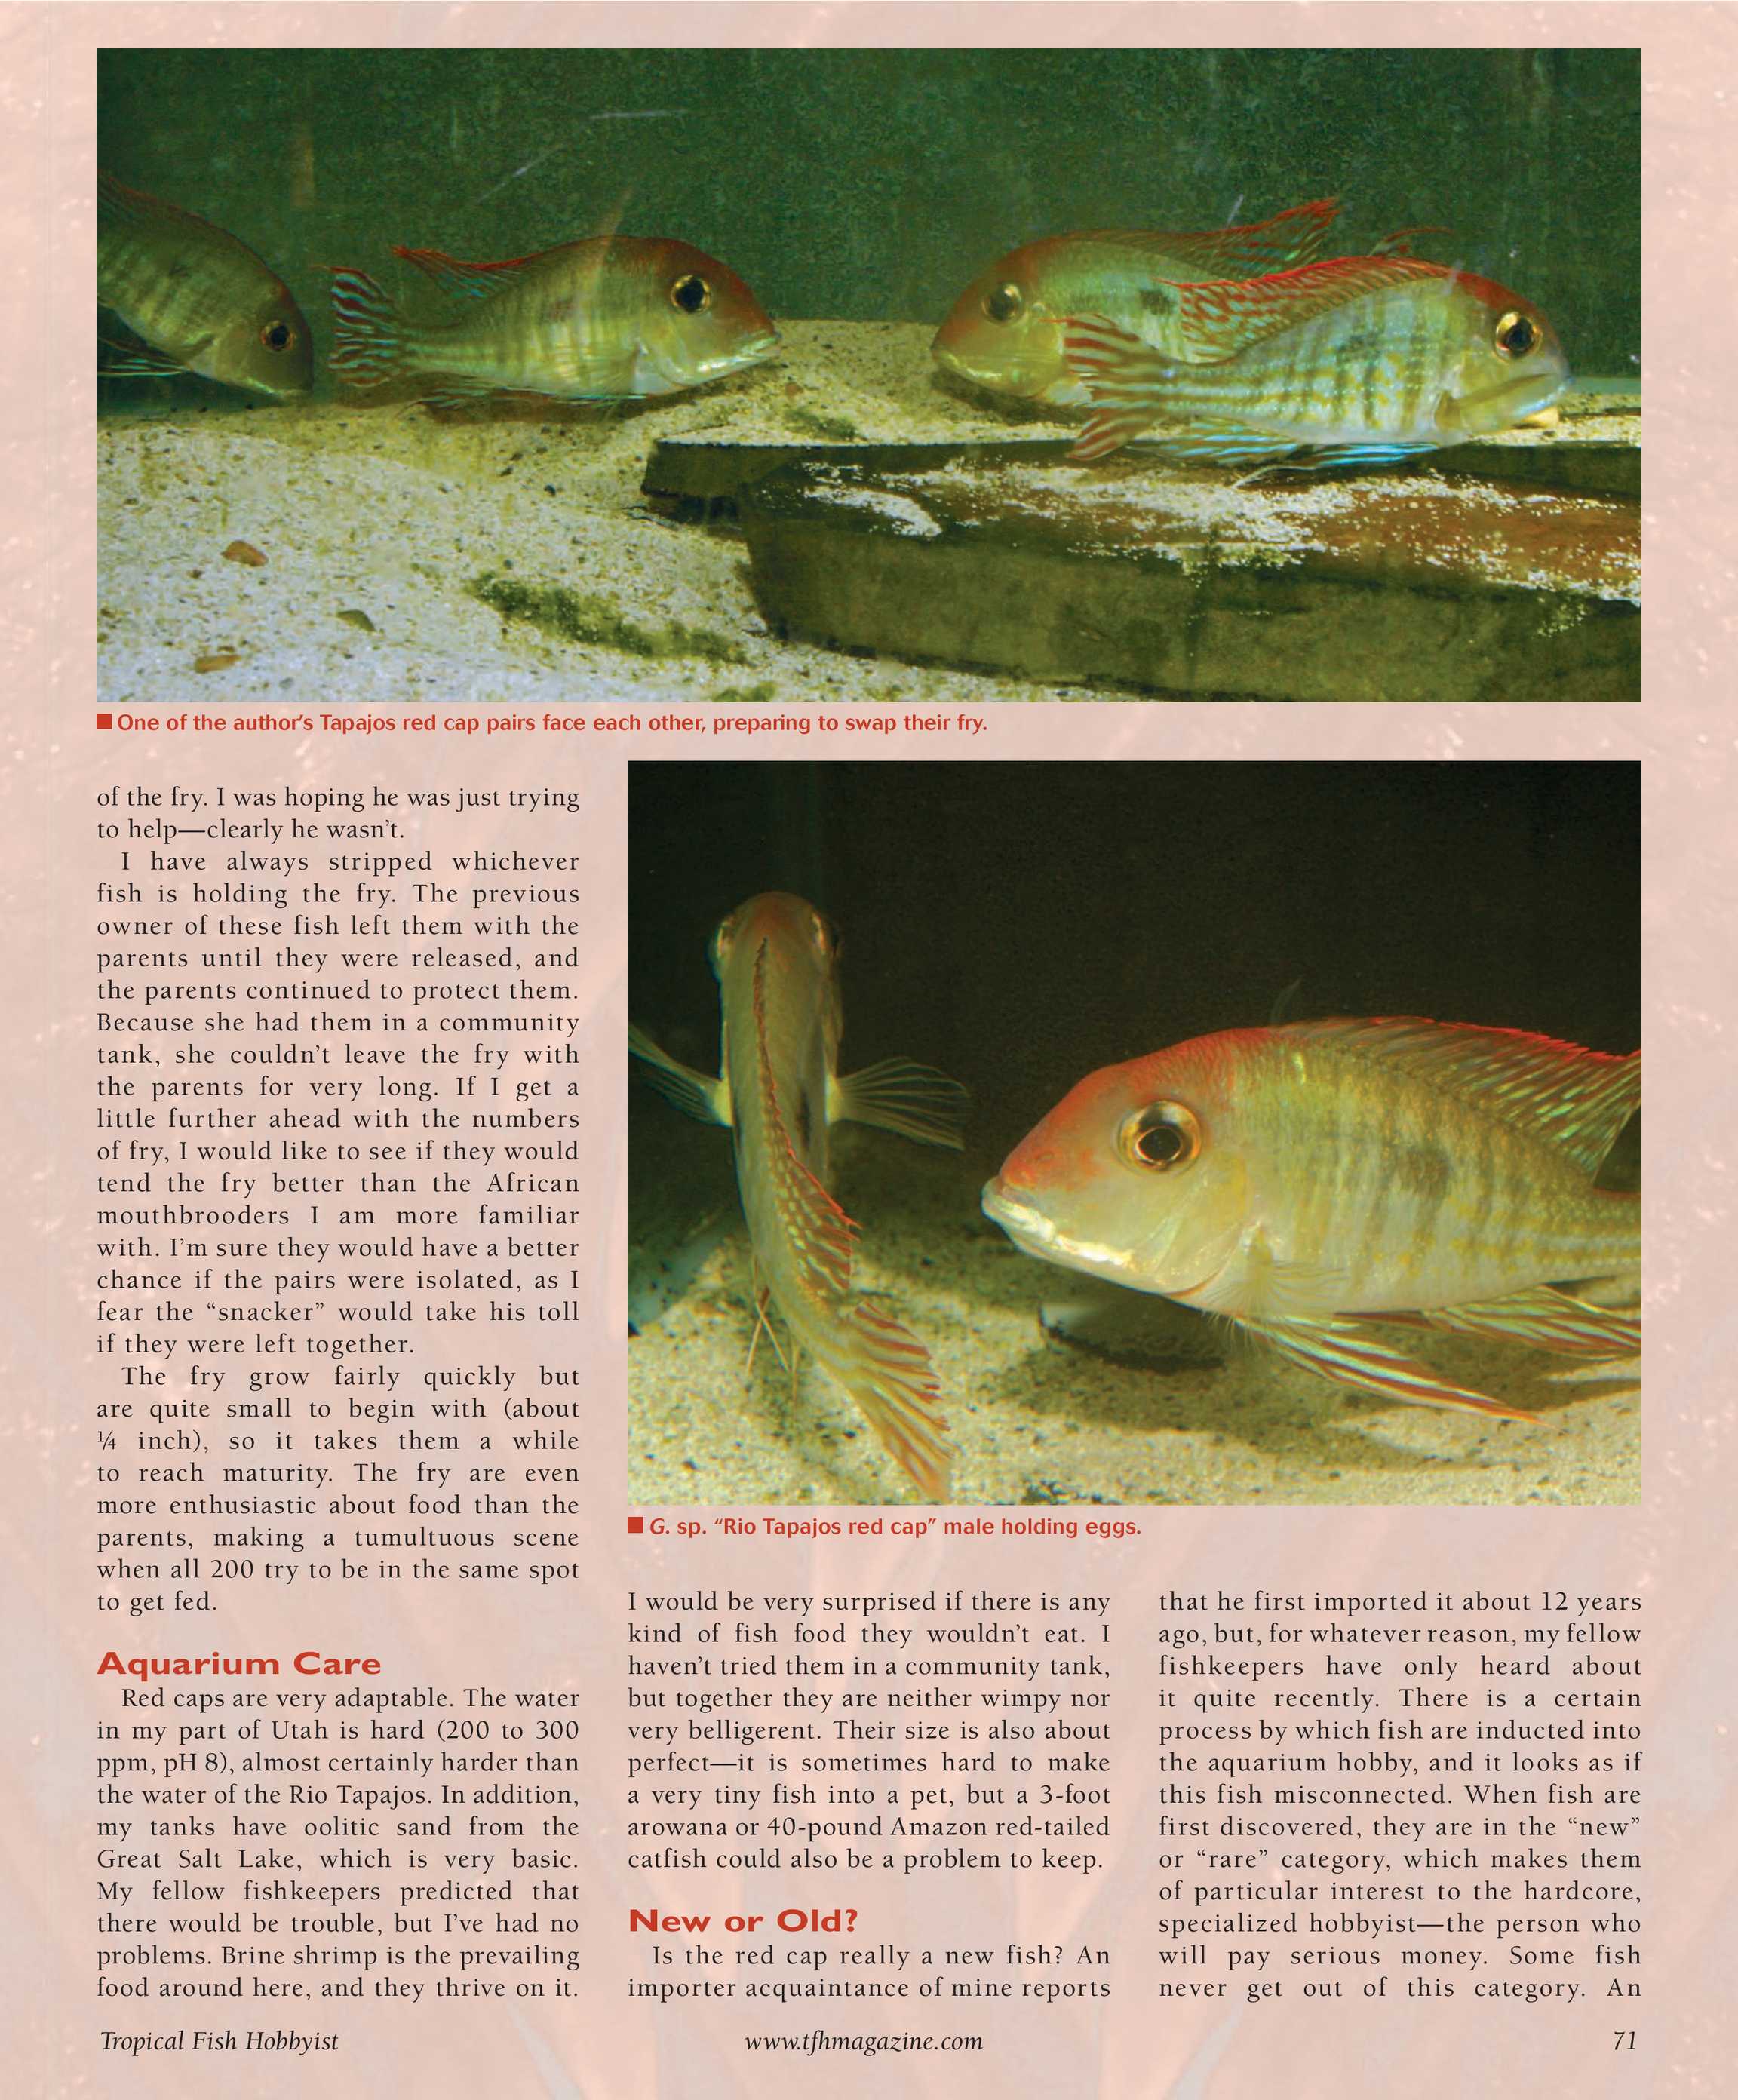 Redtail Catfish: Feeding, Reproduction, and Care